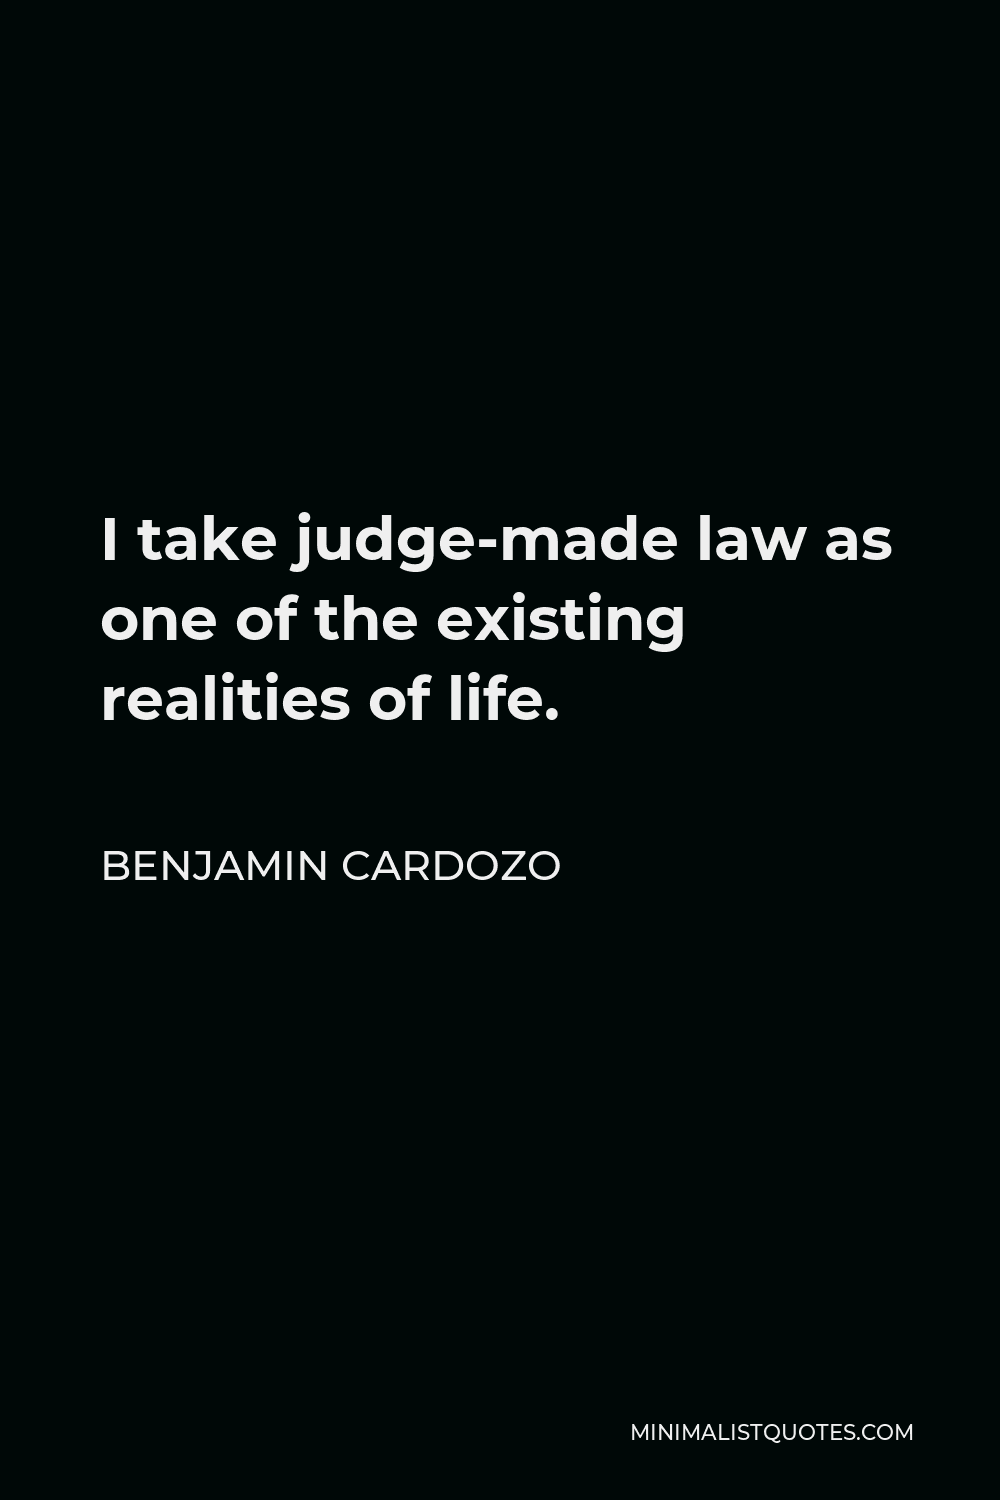 Benjamin Cardozo Quote - I take judge-made law as one of the existing realities of life.